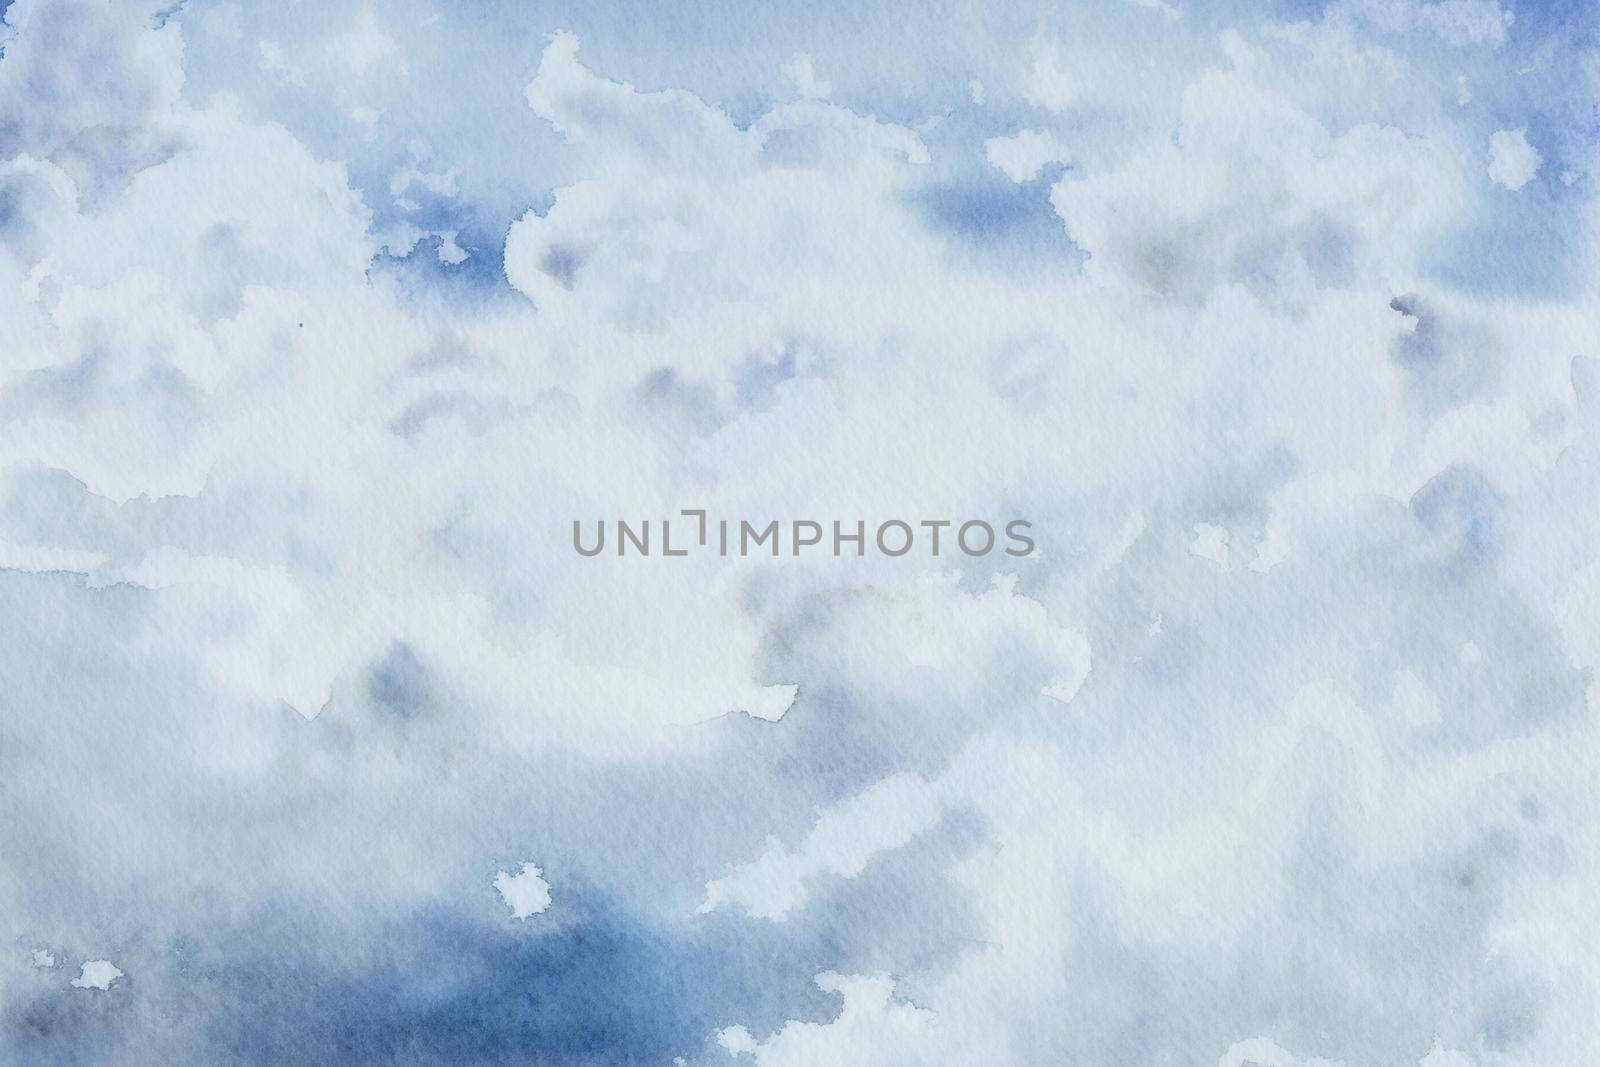 Watercolour painting nature sky background by Nuamfolio